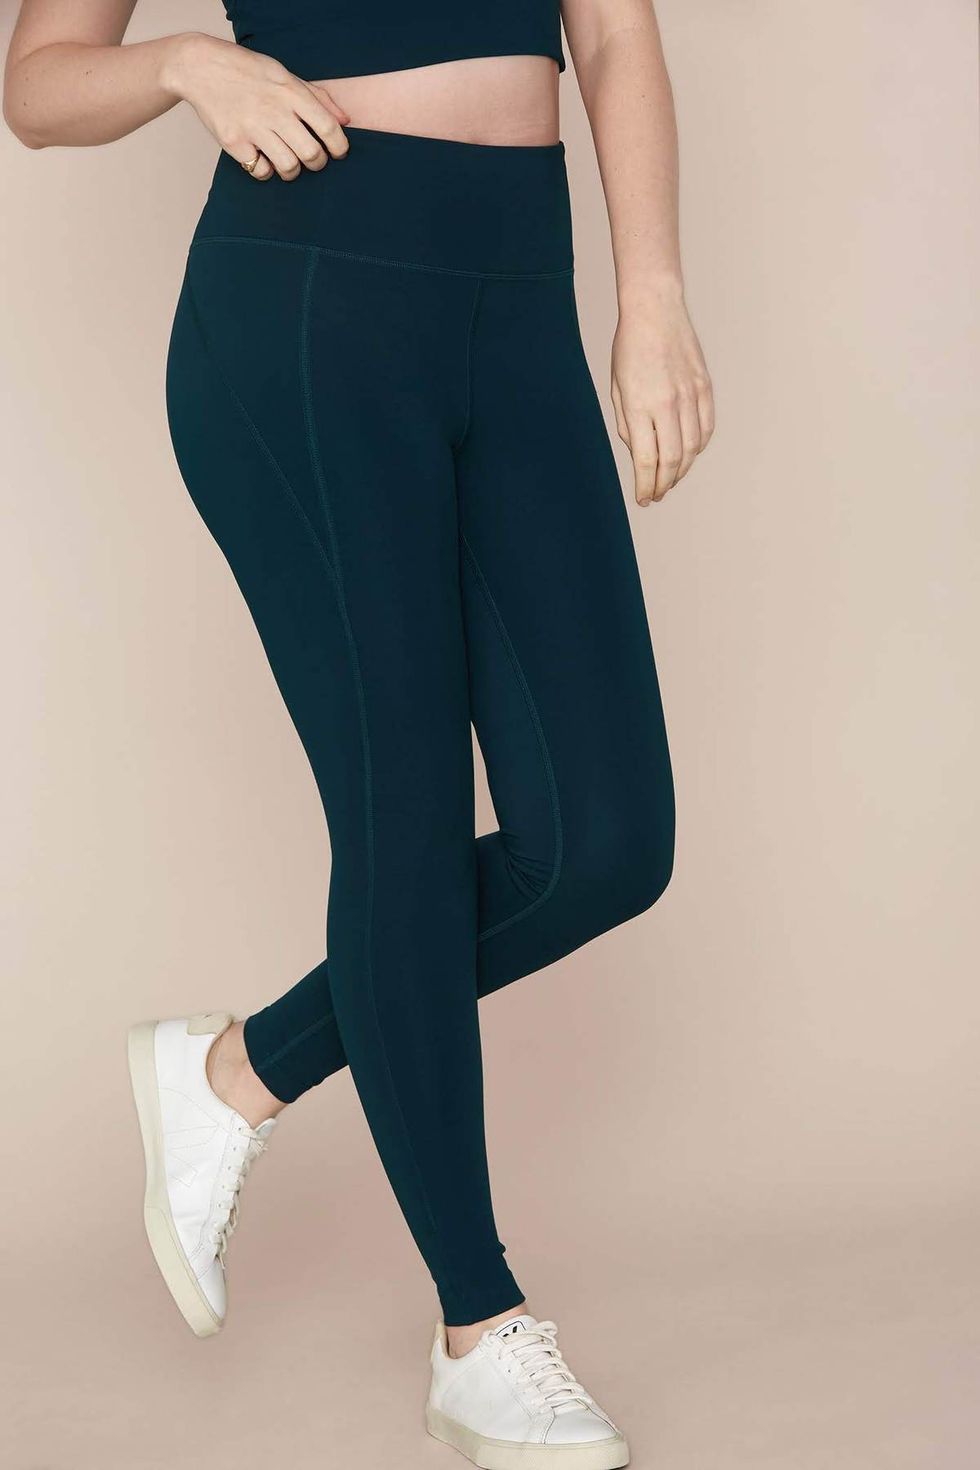 Girls in Leggings 🍑 on X: Green #leggings are rare these days - even  though this #fitness queen demonstrates how good they can look, at least if  you have a perfect shape